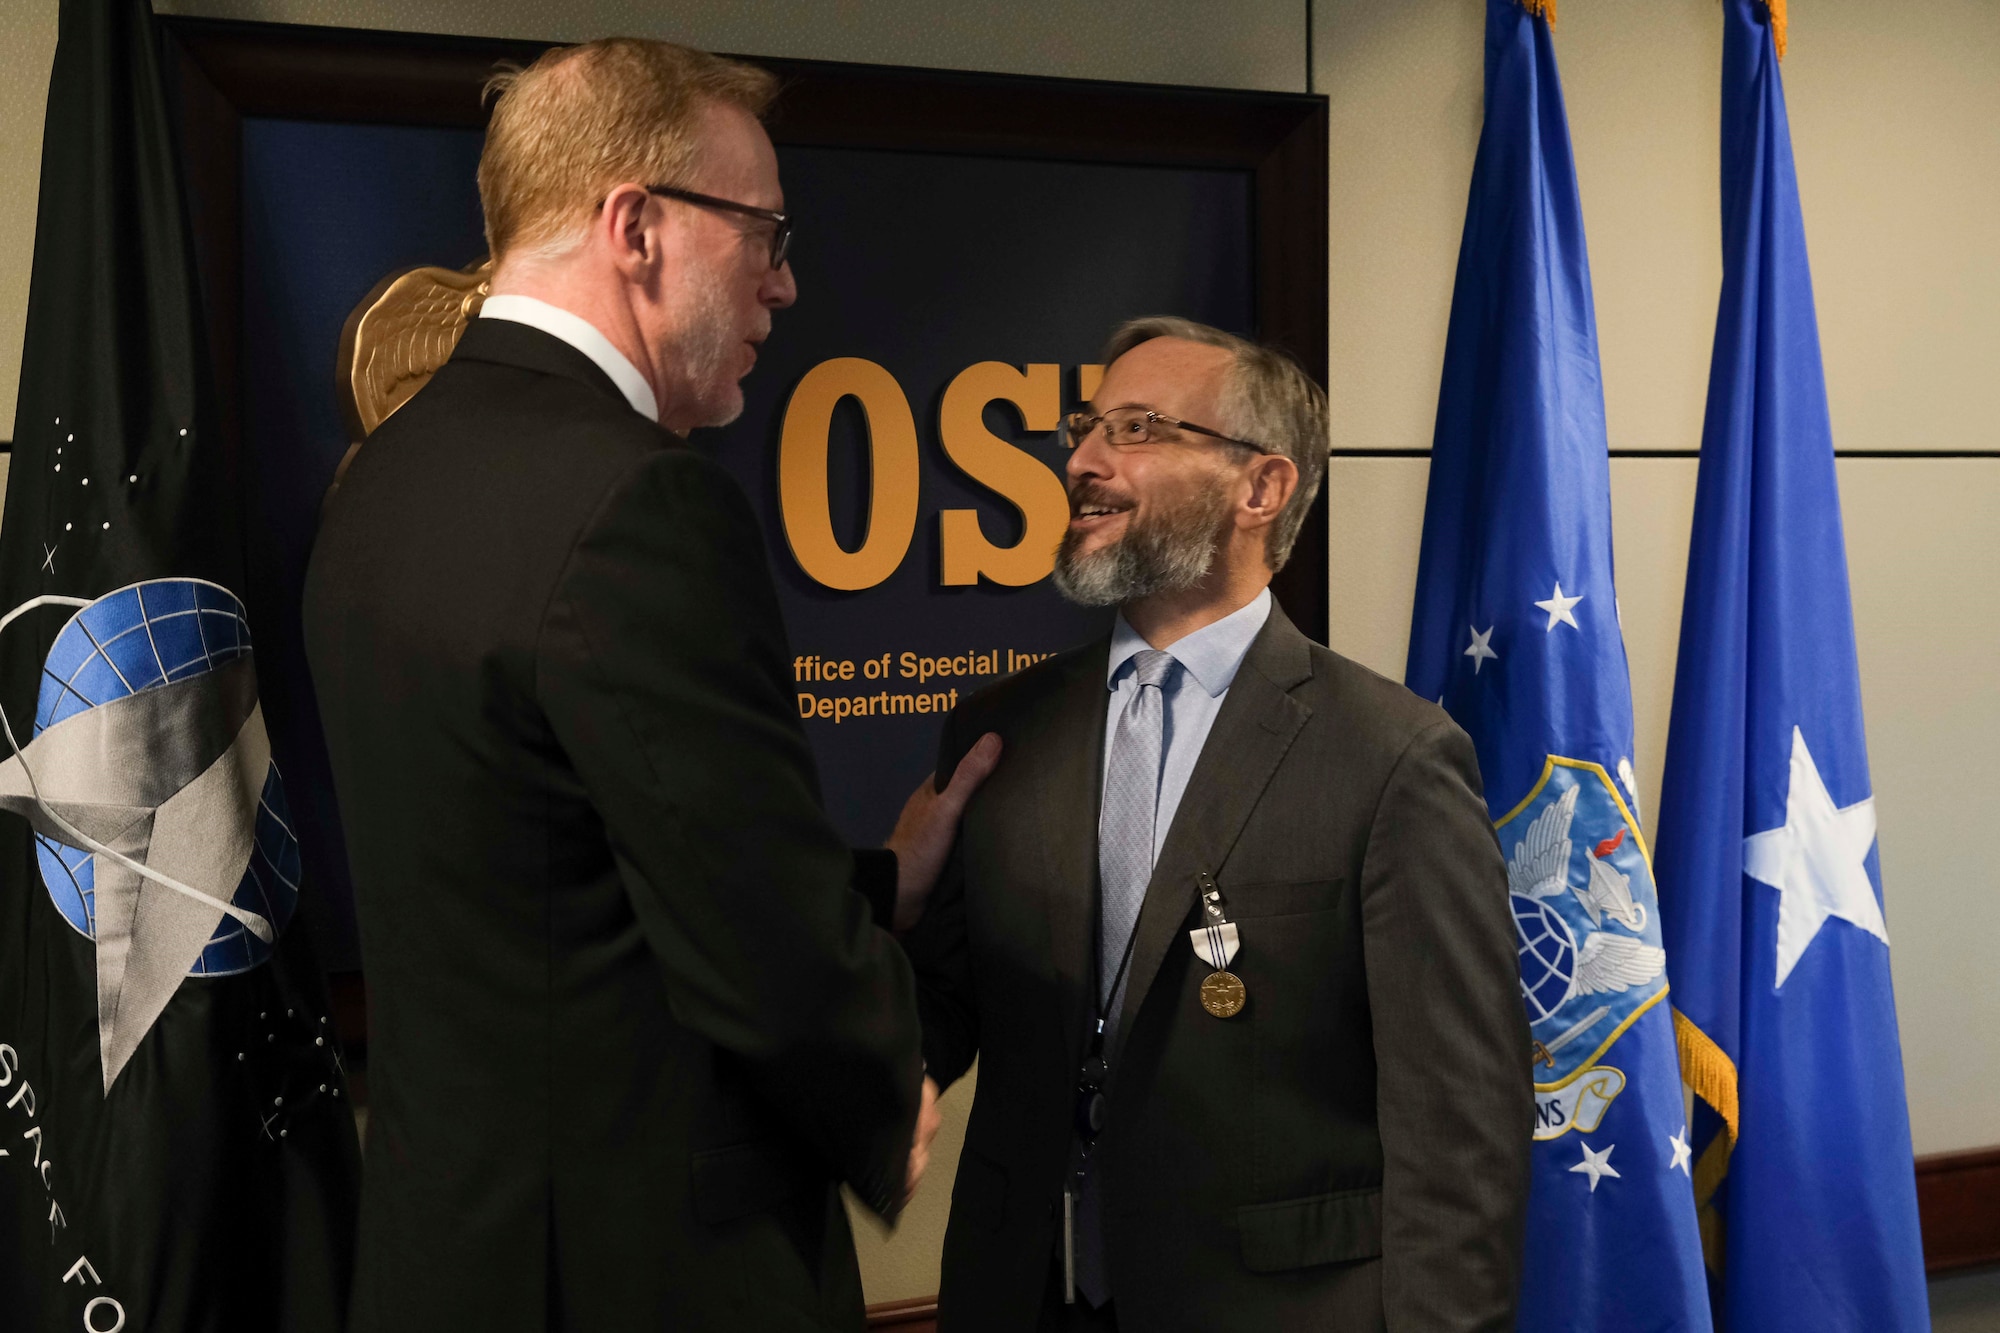 SA James Cangialosi is congratulated by Mr. John Dixson, acting Director for Defense Intelligence Counterintelligence, Law Enforcement & Security, after receiving The Office of the Secretary of Defense Medal for Exceptional Civilian Service at the Russell-Knox Building, Jan. 27, 2023. Cangialosi received the award for his work with the defense intelligence community. (U.S. Air Force photo by Tech. Sgt. Joshua King, OSI/PA)